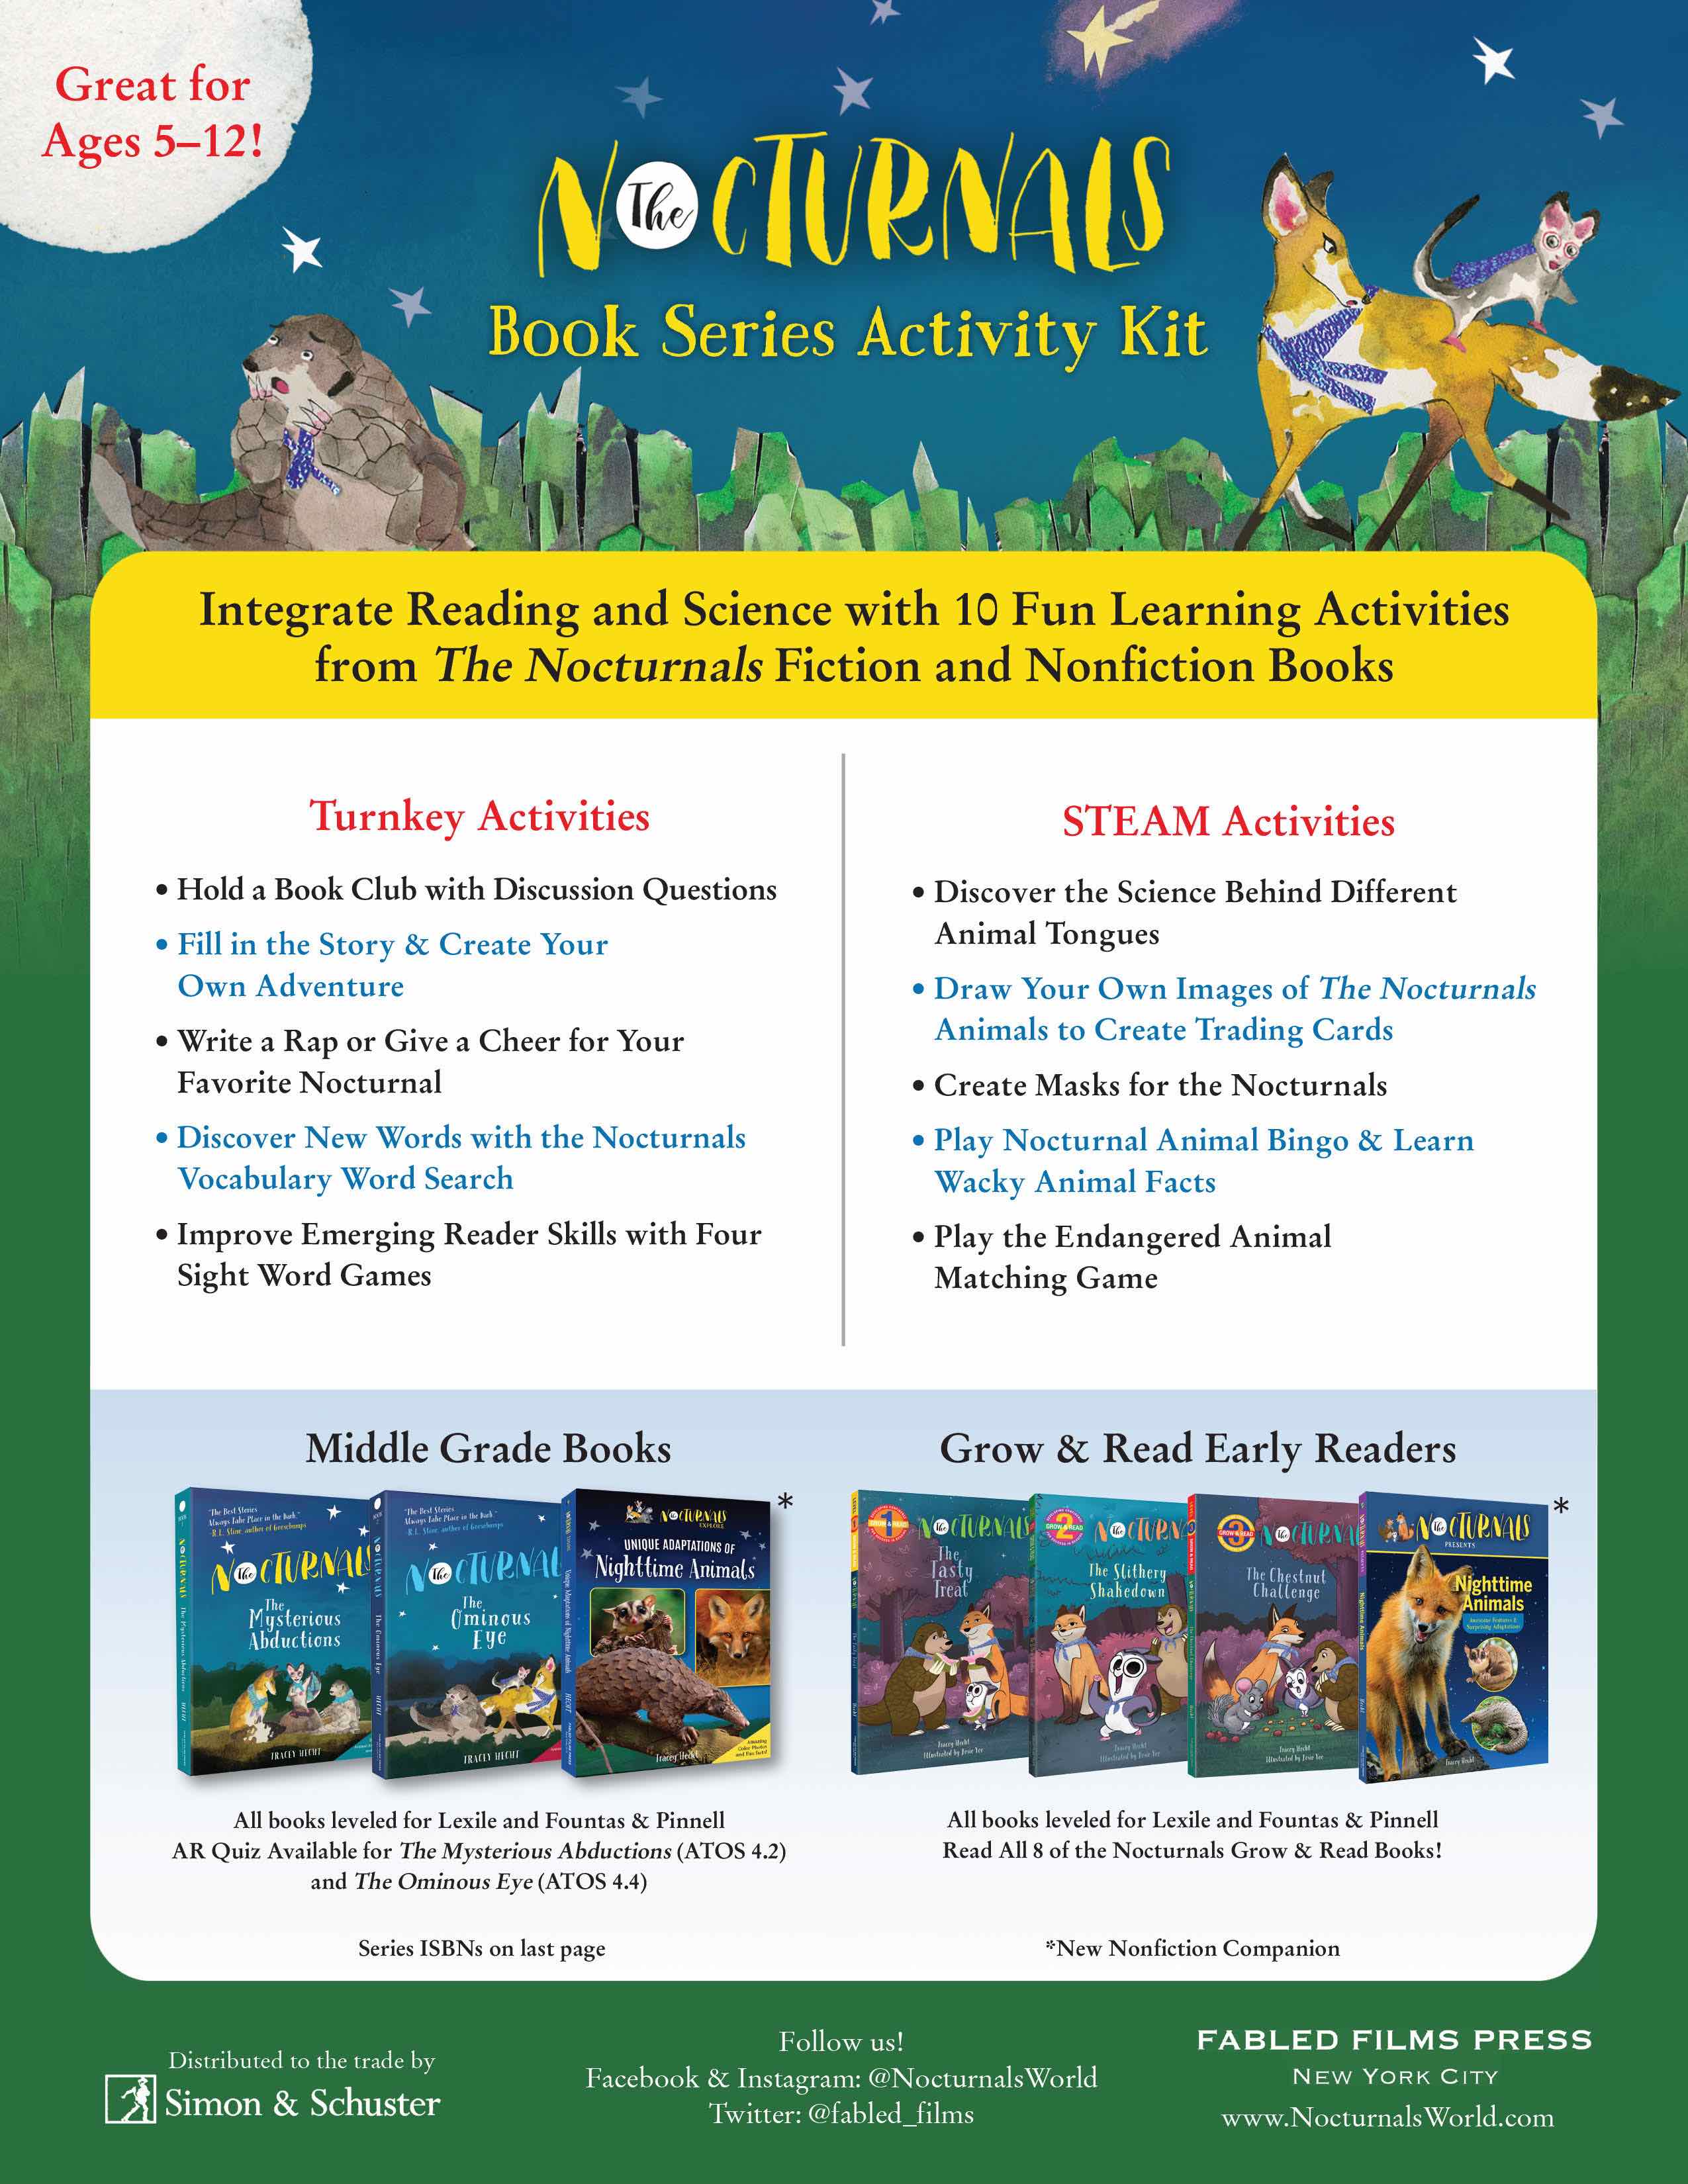 The Nocturnals Series Activity Kit integrates reading and science with 10 fun learning activities from The Nocturnals fiction and nonfiction books such as book club questions and matching games. 